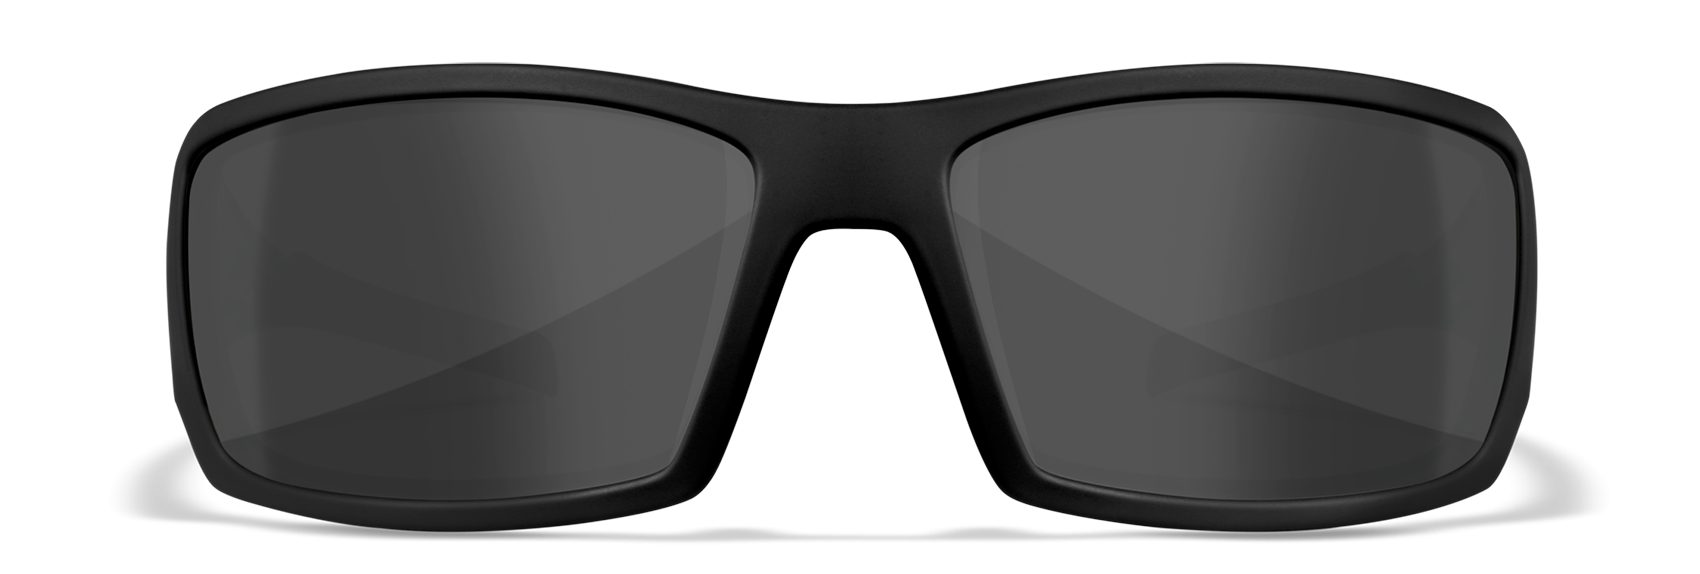 Wiley X WX Twisted Matte Black Polycarbonate Sunglasses